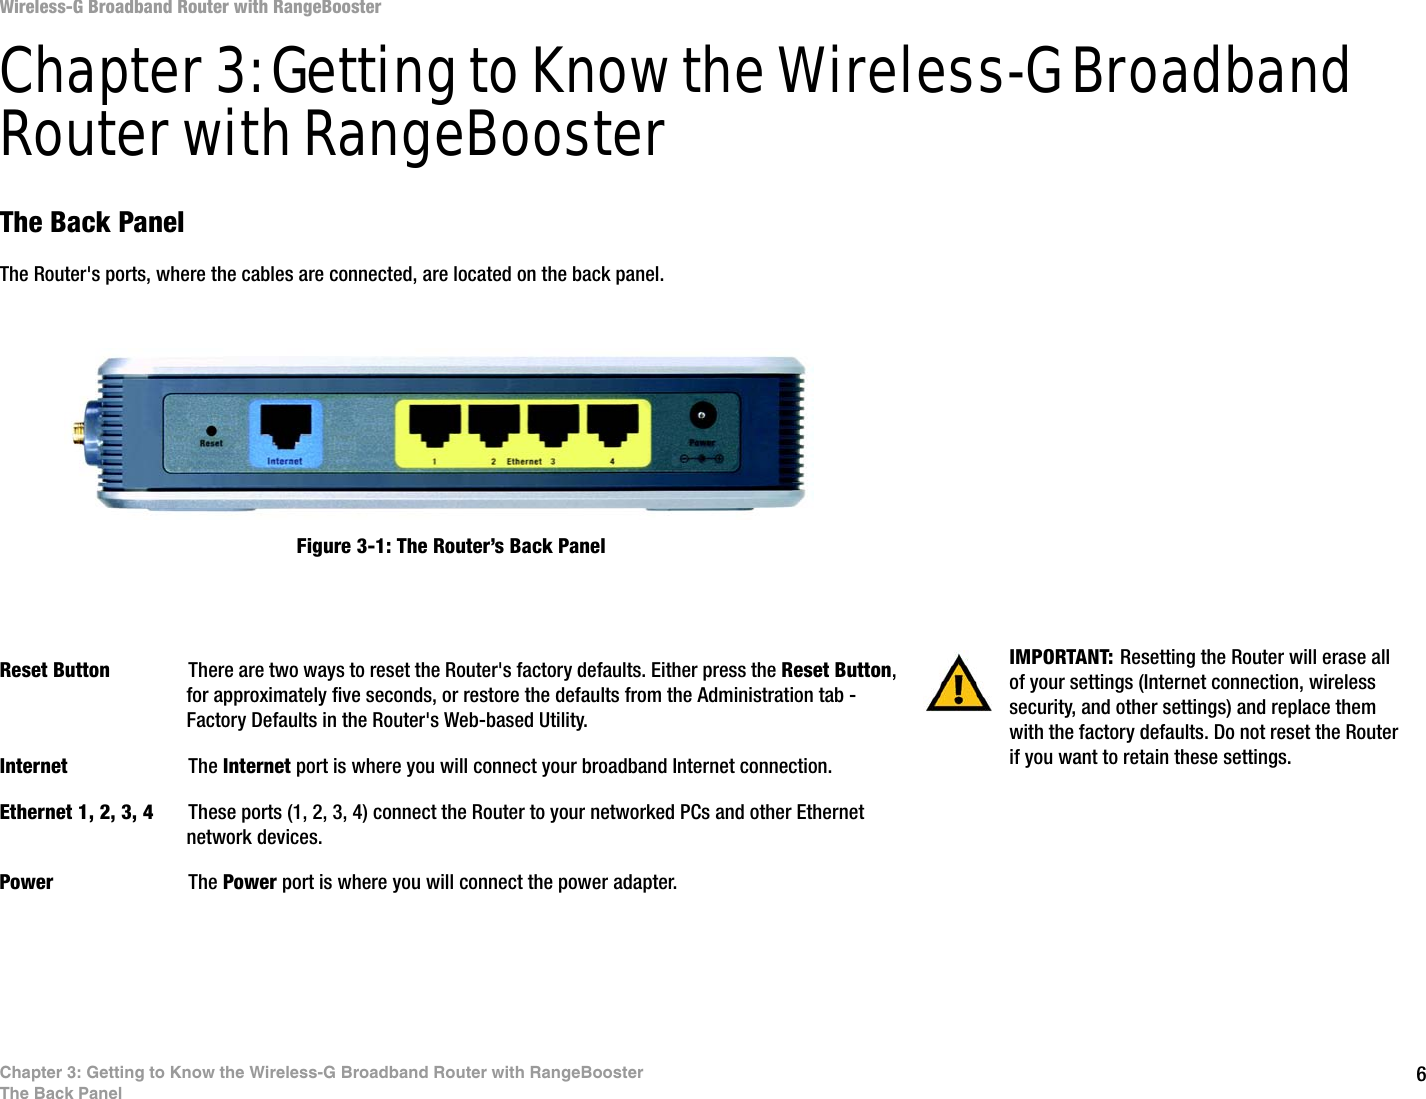 6Chapter 3: Getting to Know the Wireless-G Broadband Router with RangeBoosterThe Back PanelWireless-G Broadband Router with RangeBoosterChapter 3: Getting to Know the Wireless-G Broadband Router with RangeBoosterThe Back PanelThe Router&apos;s ports, where the cables are connected, are located on the back panel.Reset Button There are two ways to reset the Router&apos;s factory defaults. Either press the Reset Button, for approximately five seconds, or restore the defaults from the Administration tab - Factory Defaults in the Router&apos;s Web-based Utility.Internet The Internet port is where you will connect your broadband Internet connection.Ethernet 1, 2, 3, 4 These ports (1, 2, 3, 4) connect the Router to your networked PCs and other Ethernet network devices.Power The Power port is where you will connect the power adapter.IMPORTANT: Resetting the Router will erase all of your settings (Internet connection, wireless security, and other settings) and replace them with the factory defaults. Do not reset the Router if you want to retain these settings.Figure 3-1: The Router’s Back Panel